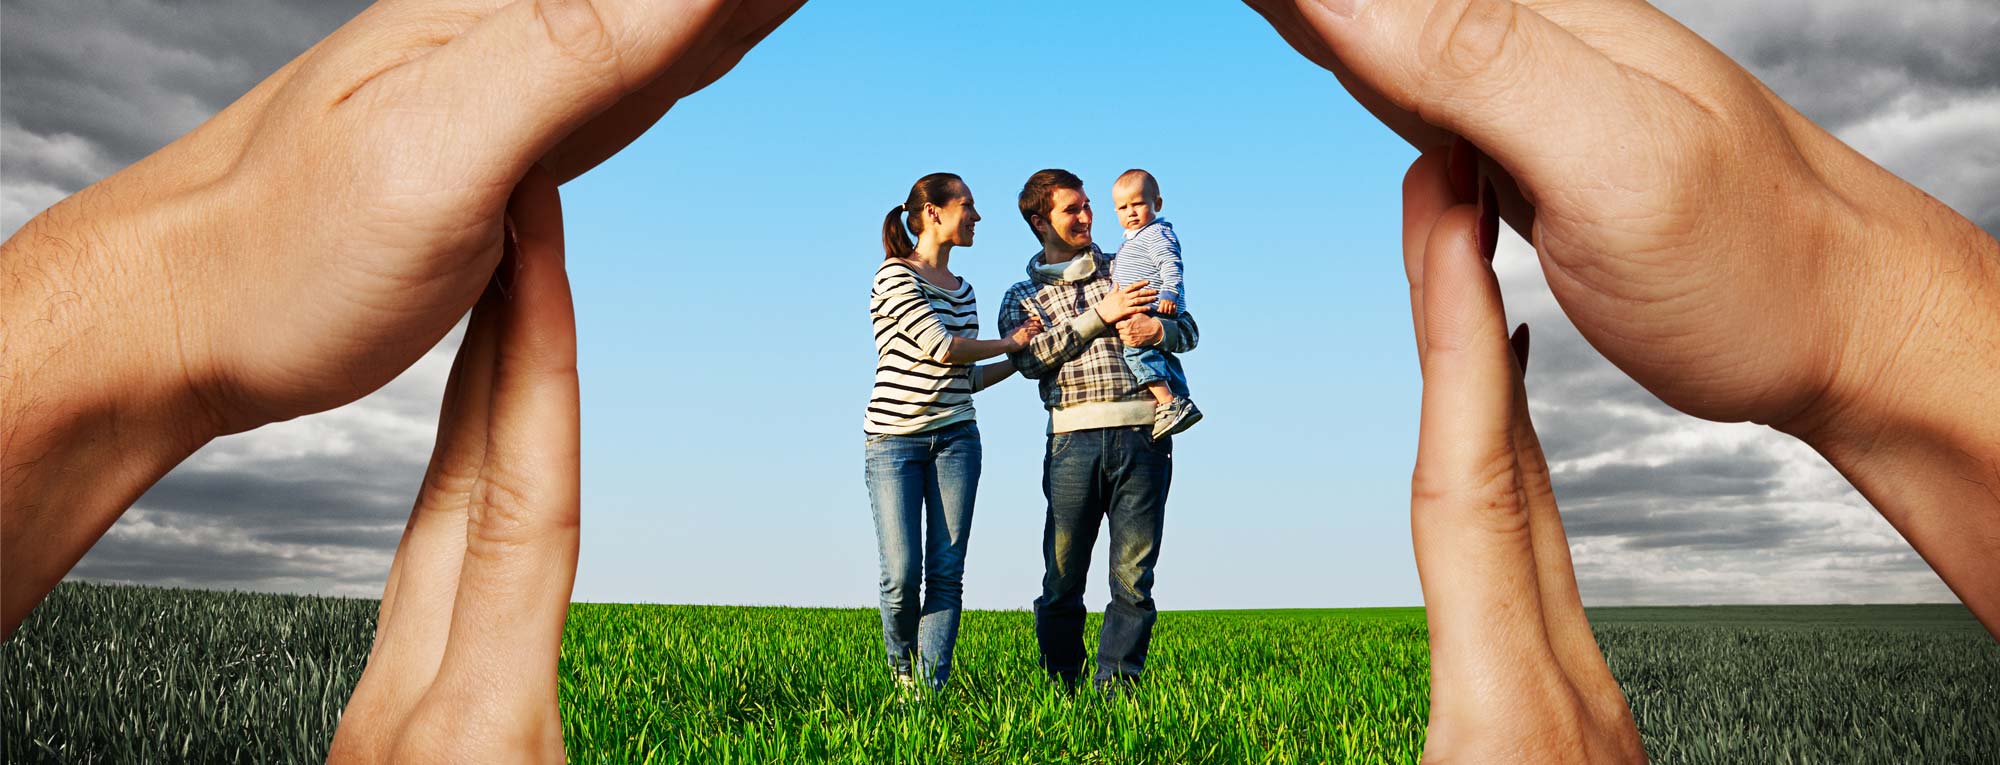 Family Standing in a Grass Field